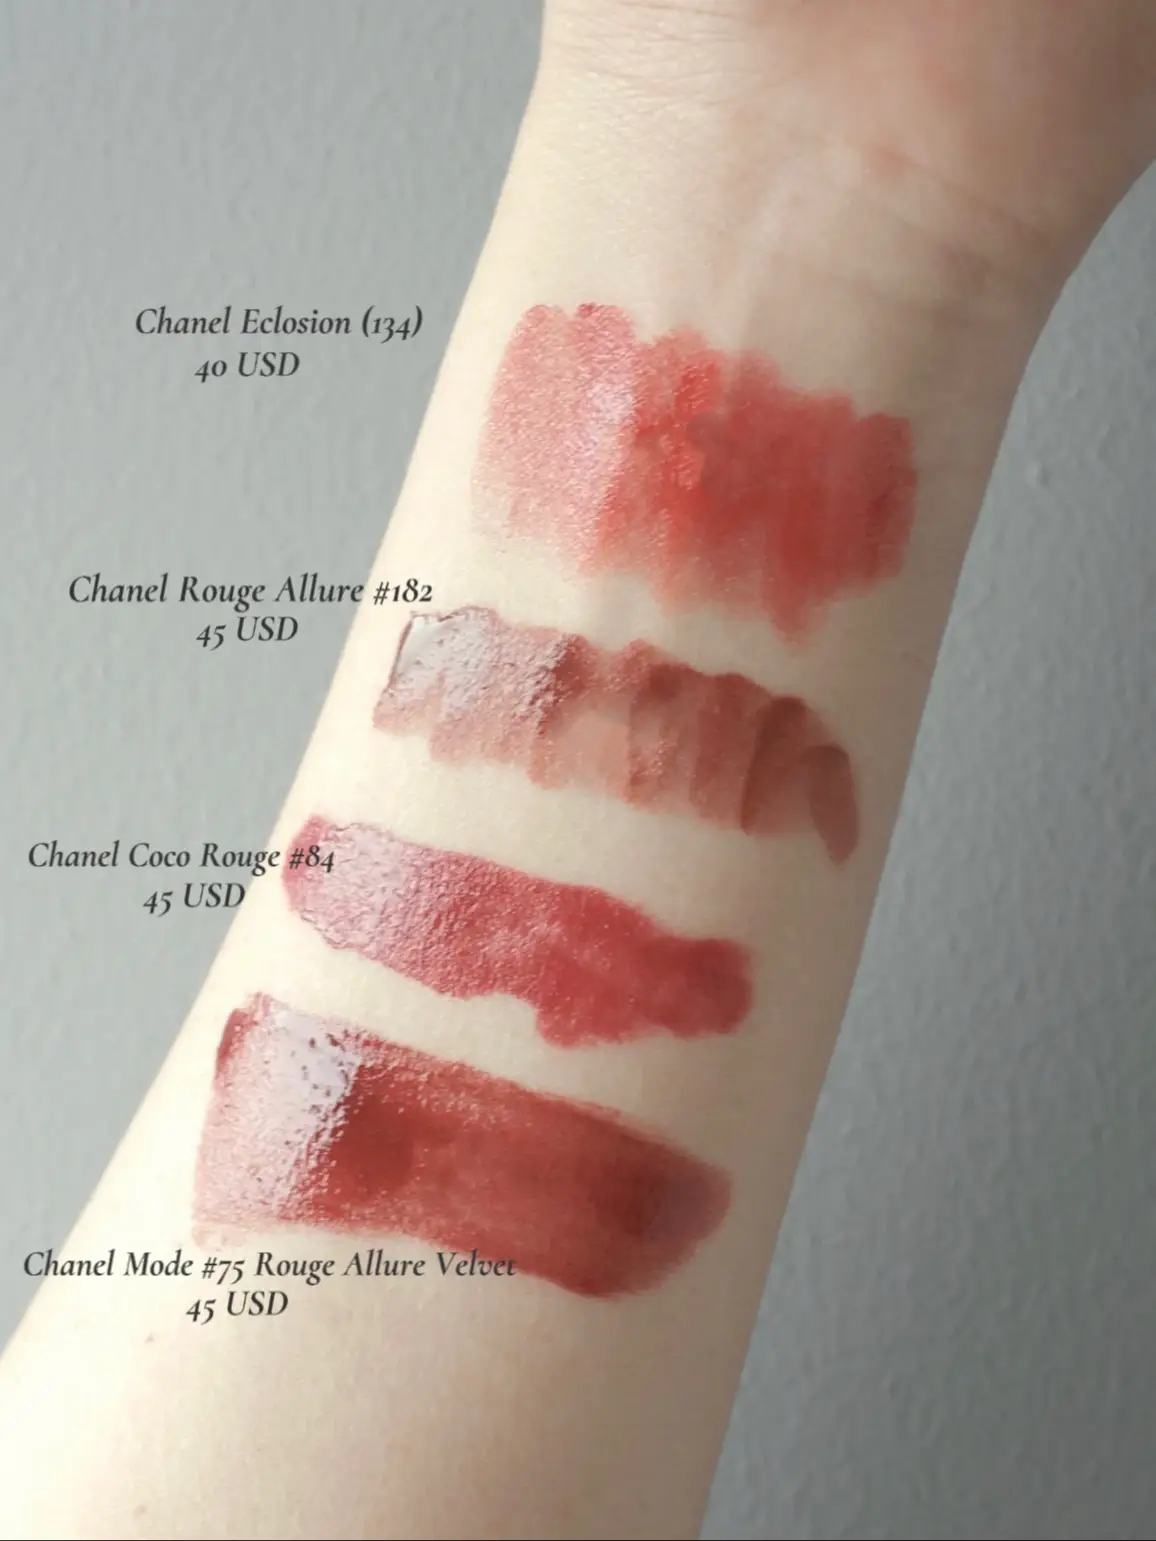 Chanel Roug Allure Velvet Luminuos Matte swatches. #chanel